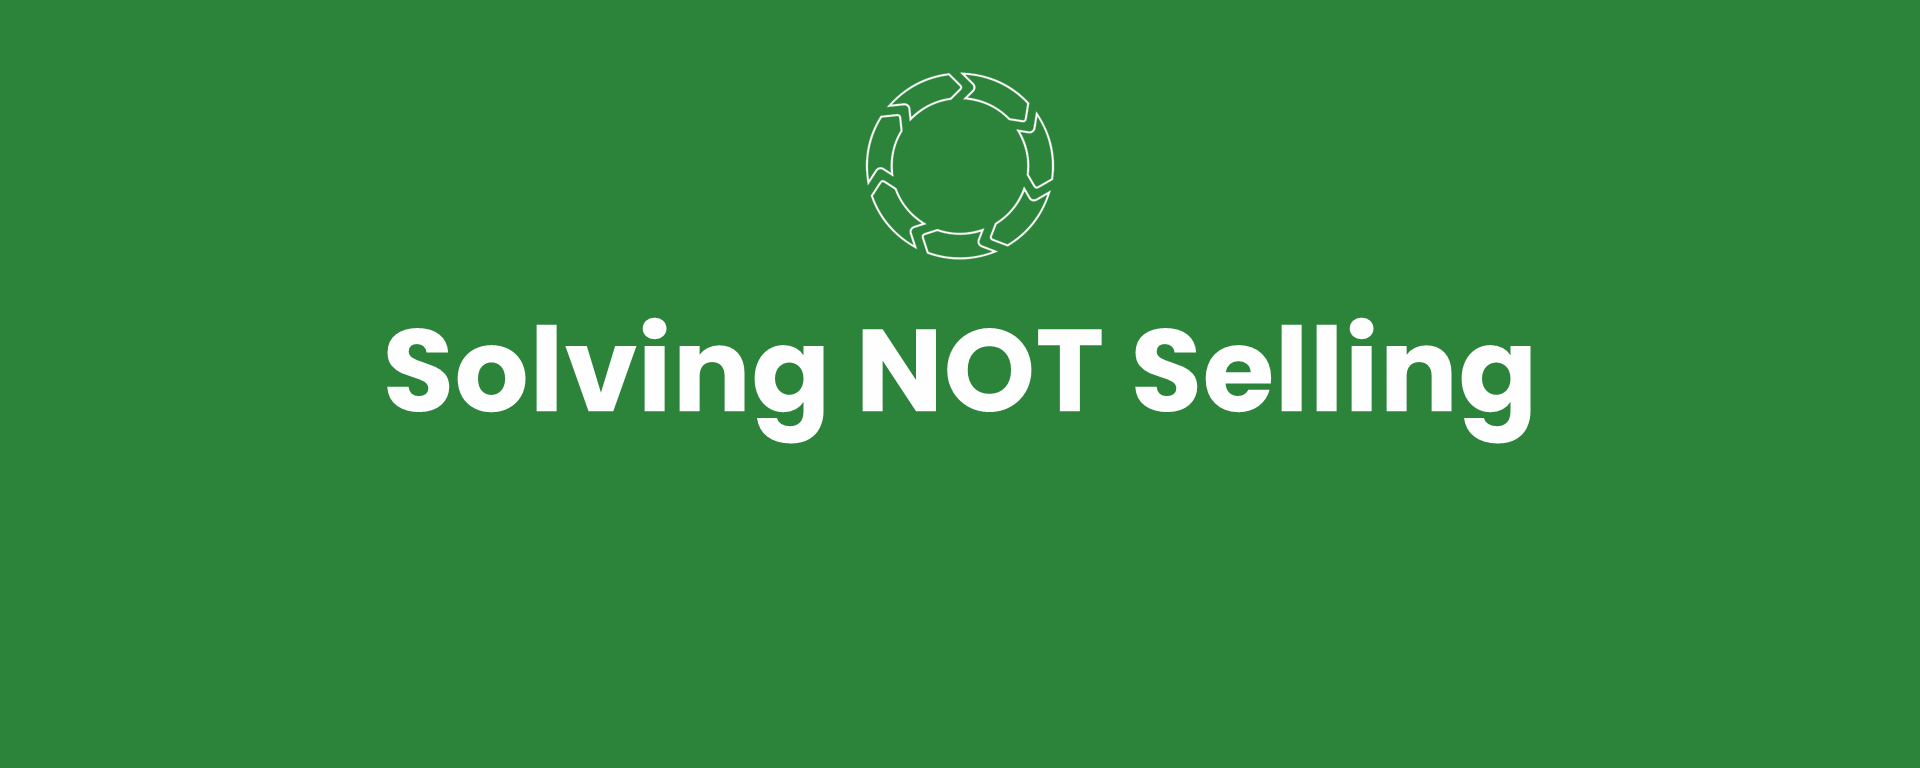 Solving NOT Selling